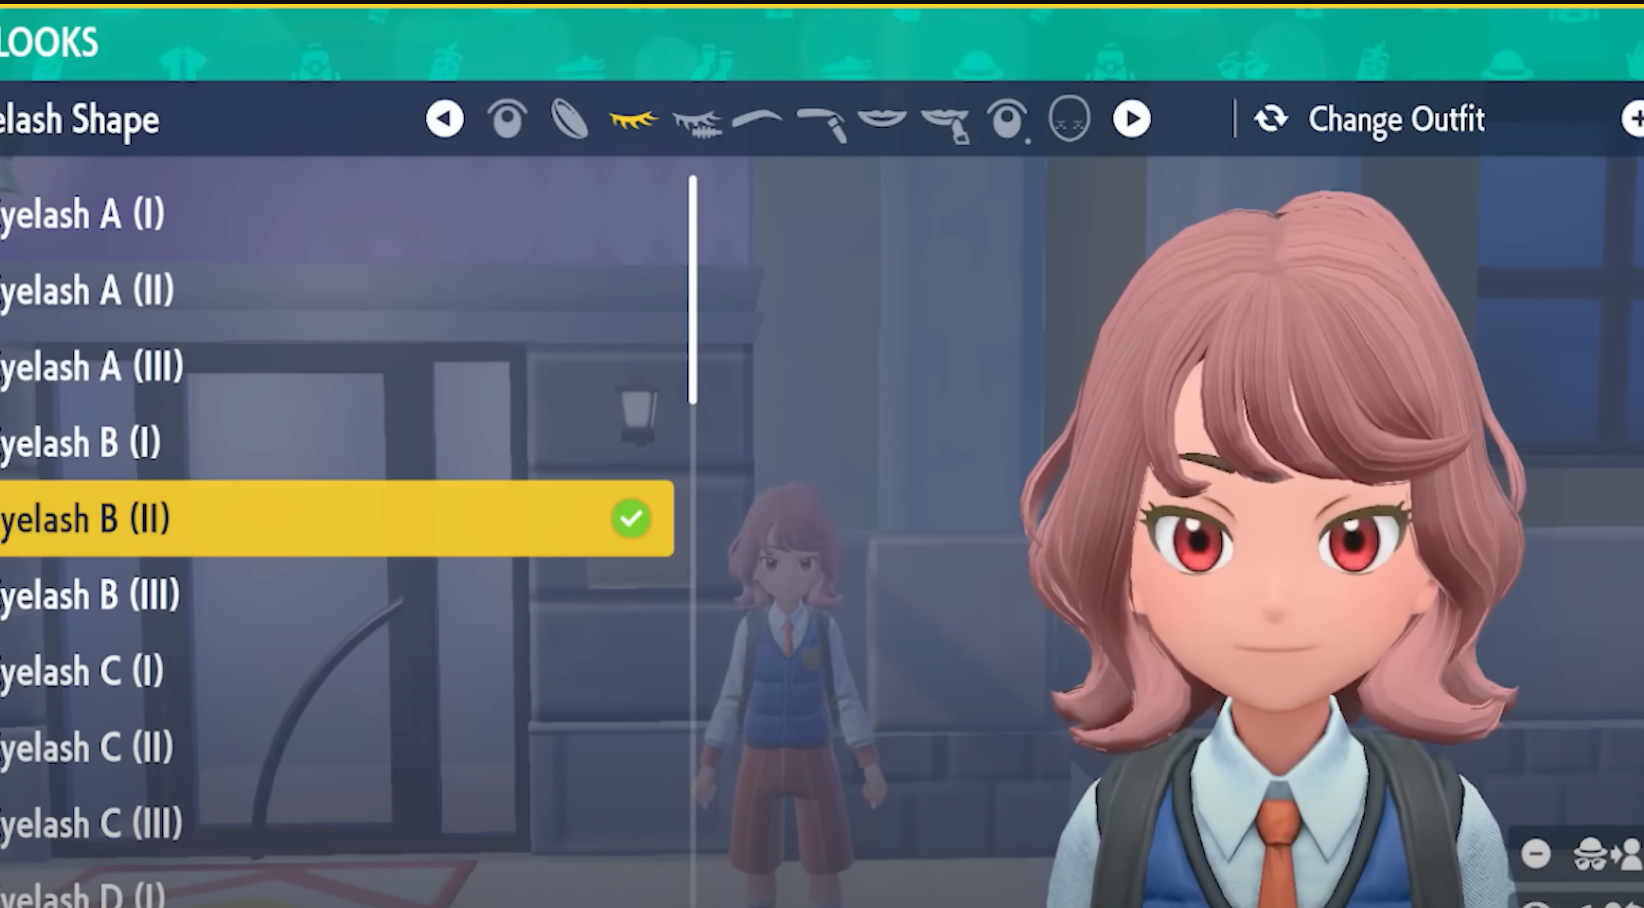 Character Customization options in Pokémon Scarlet and Violet